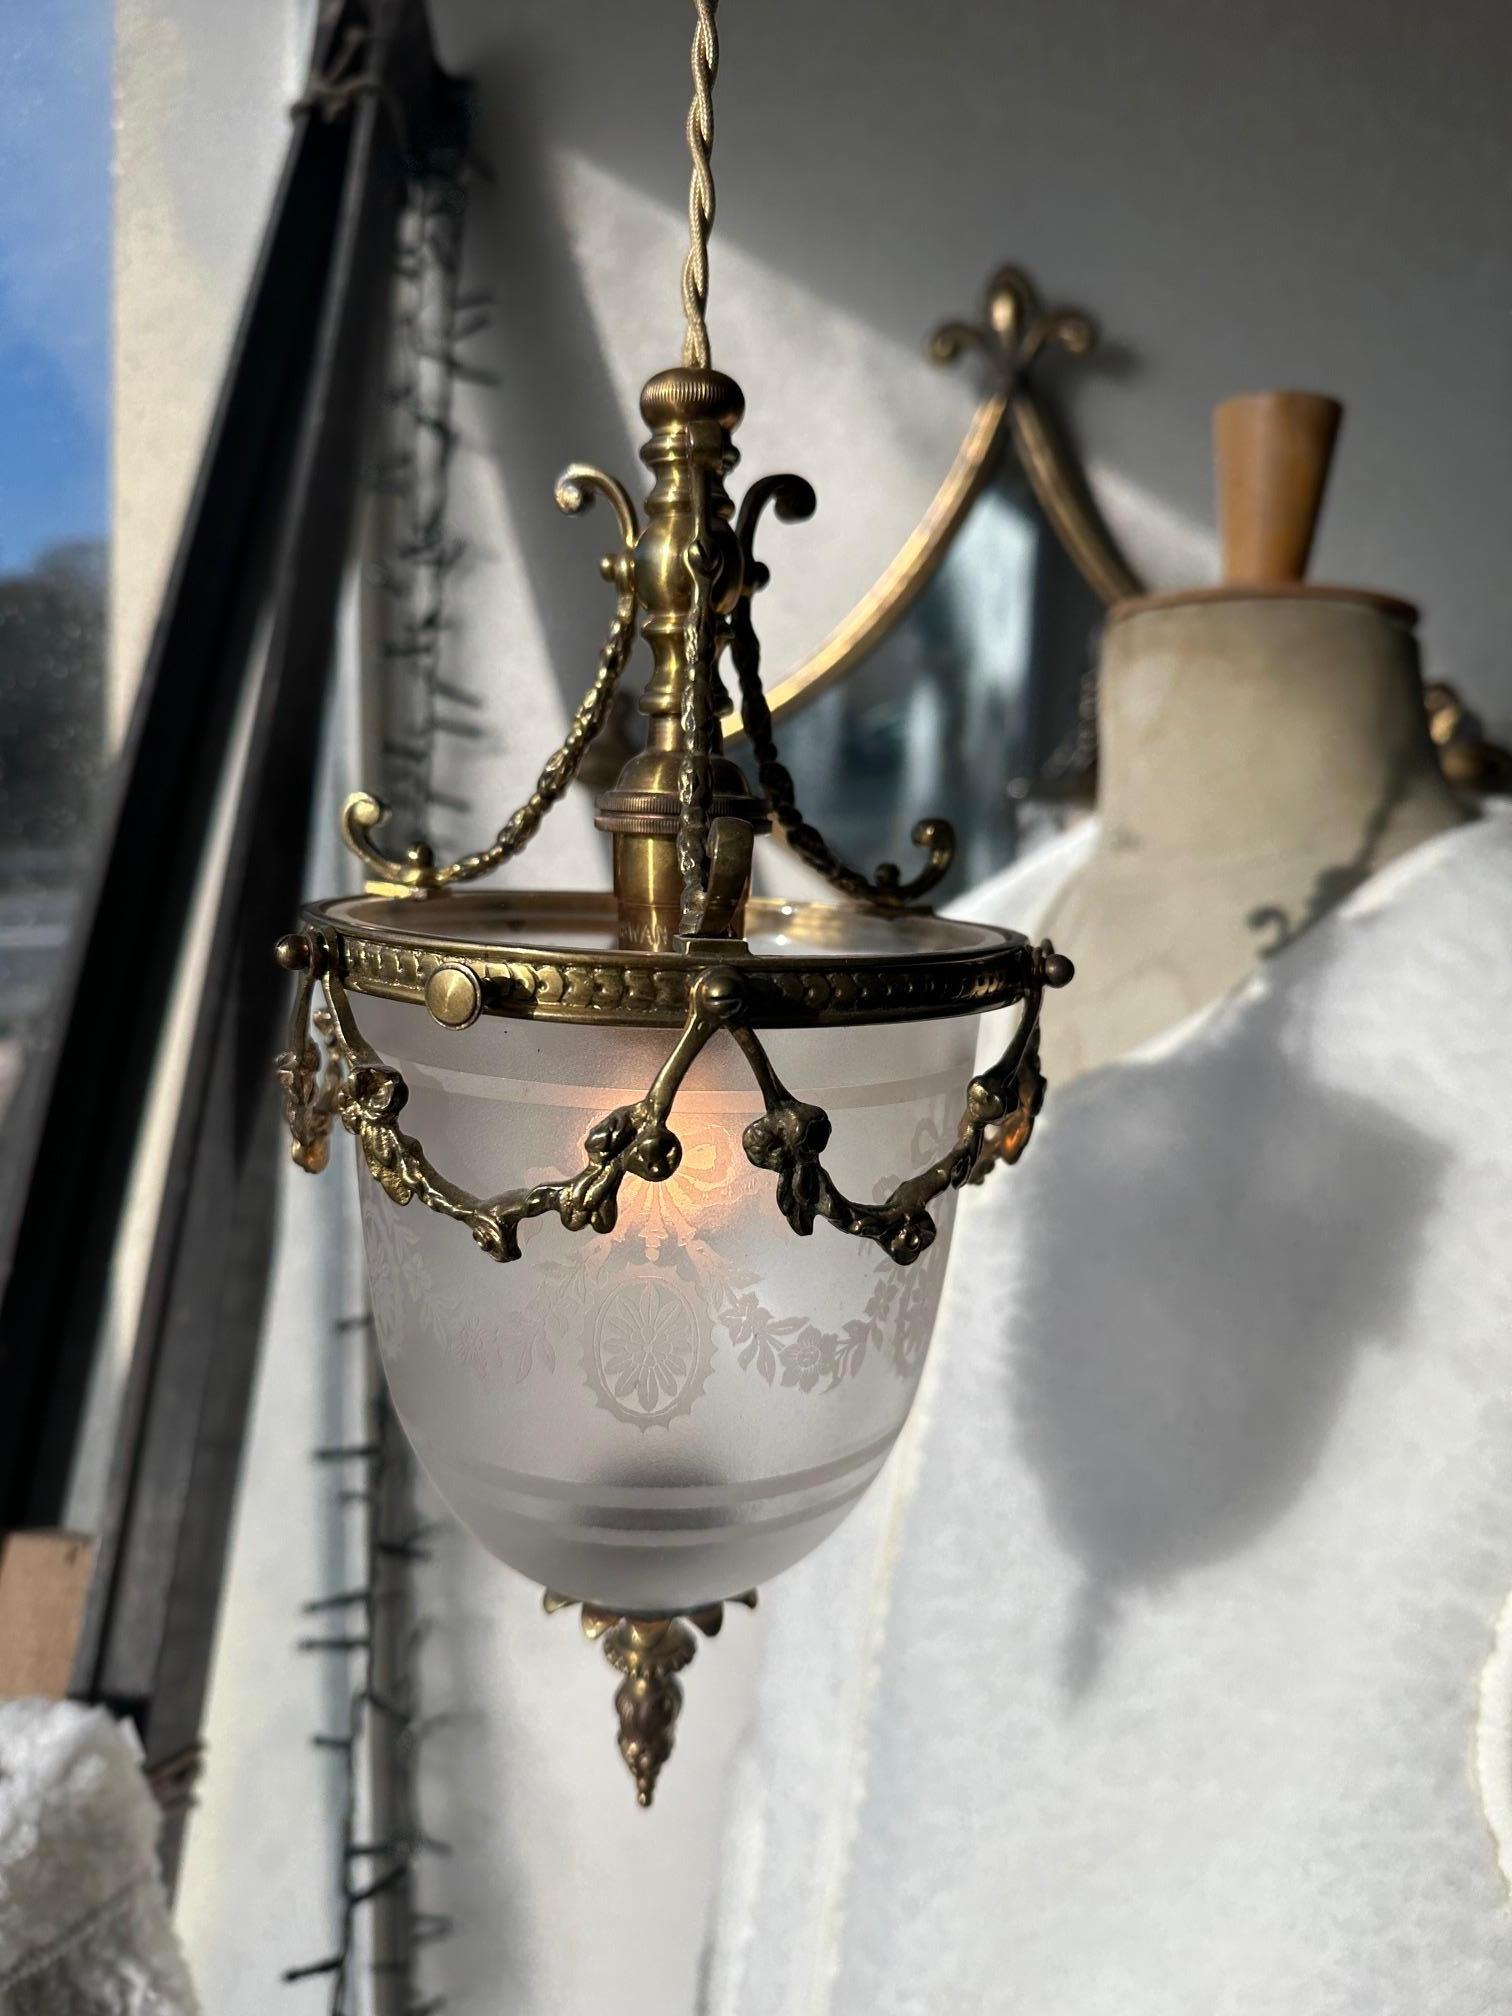 Magnificent crystal and bronze lantern dating from the art nouveau period, from the beginning of the 20th century, made in England (British made engraved in the crystal)
Bronze ribbons adorn the delicately engraved crystal globe.
Fabric thread that